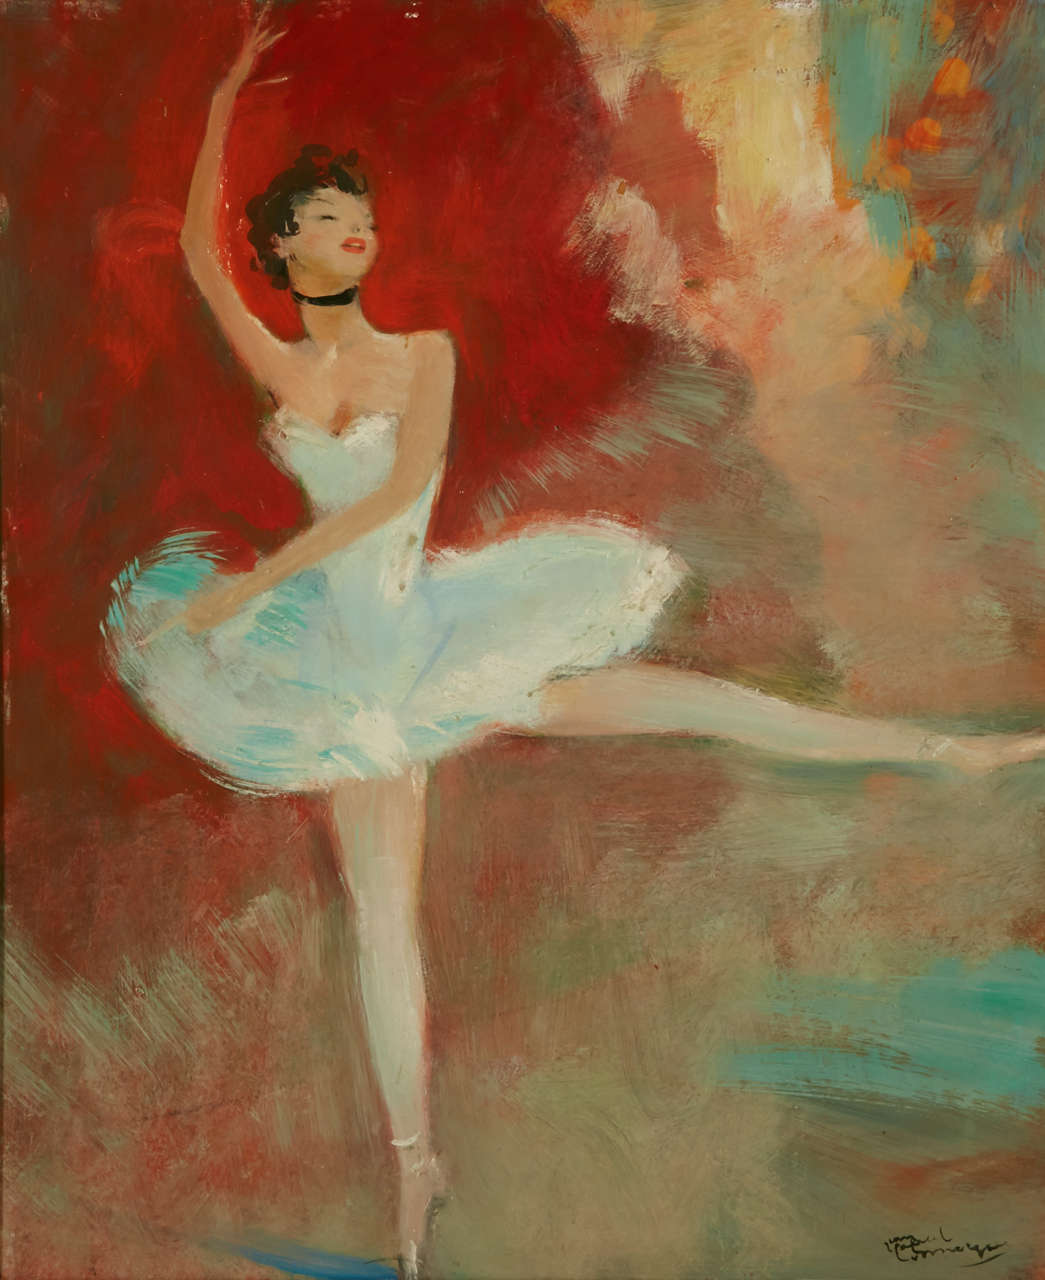 Oil on hardboard panel representing a dancer. Signed on the bottom right 'Jean Gabriel Domergue'. This work is inventoried by expert Mr. Noe Willer in Jean-Gabriel Domergue archives.

Dimension with frame: 60cm x 51cm.
Painting dimension: 45cm x